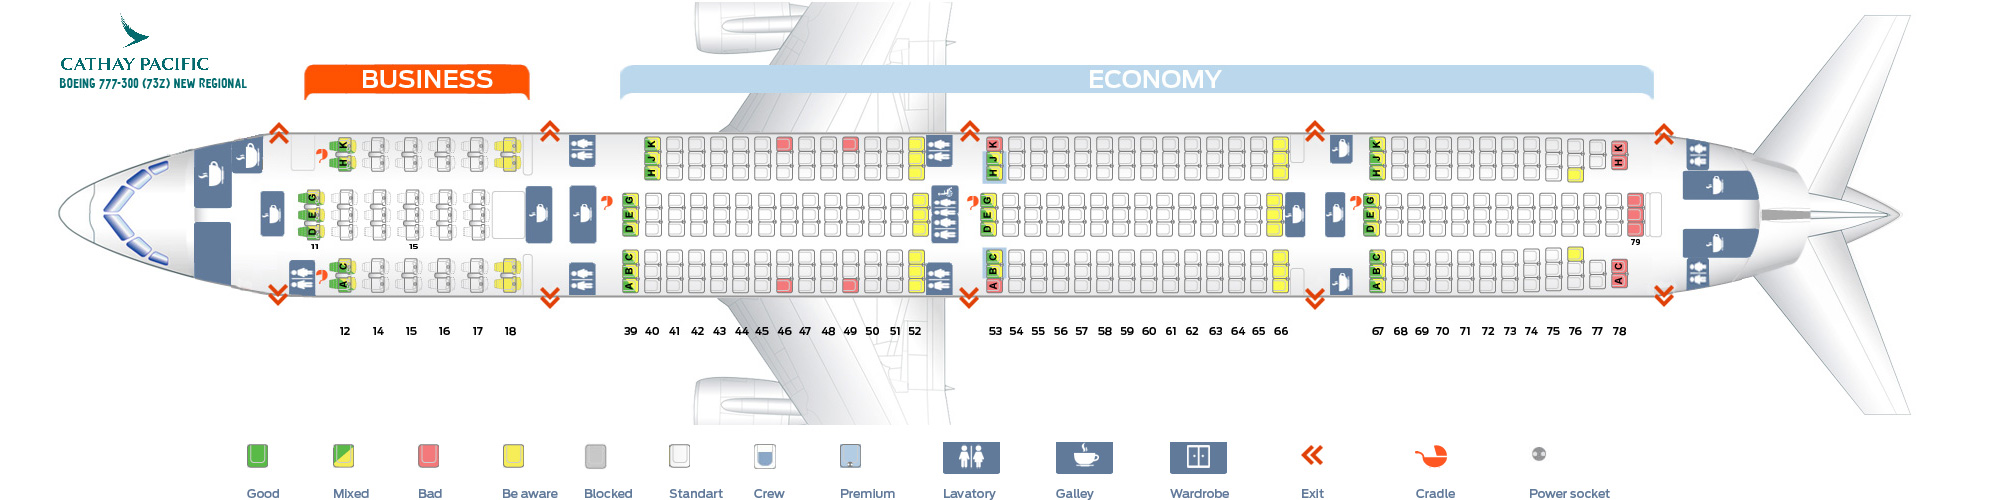 Cathay Pacific 773 Seating Chart